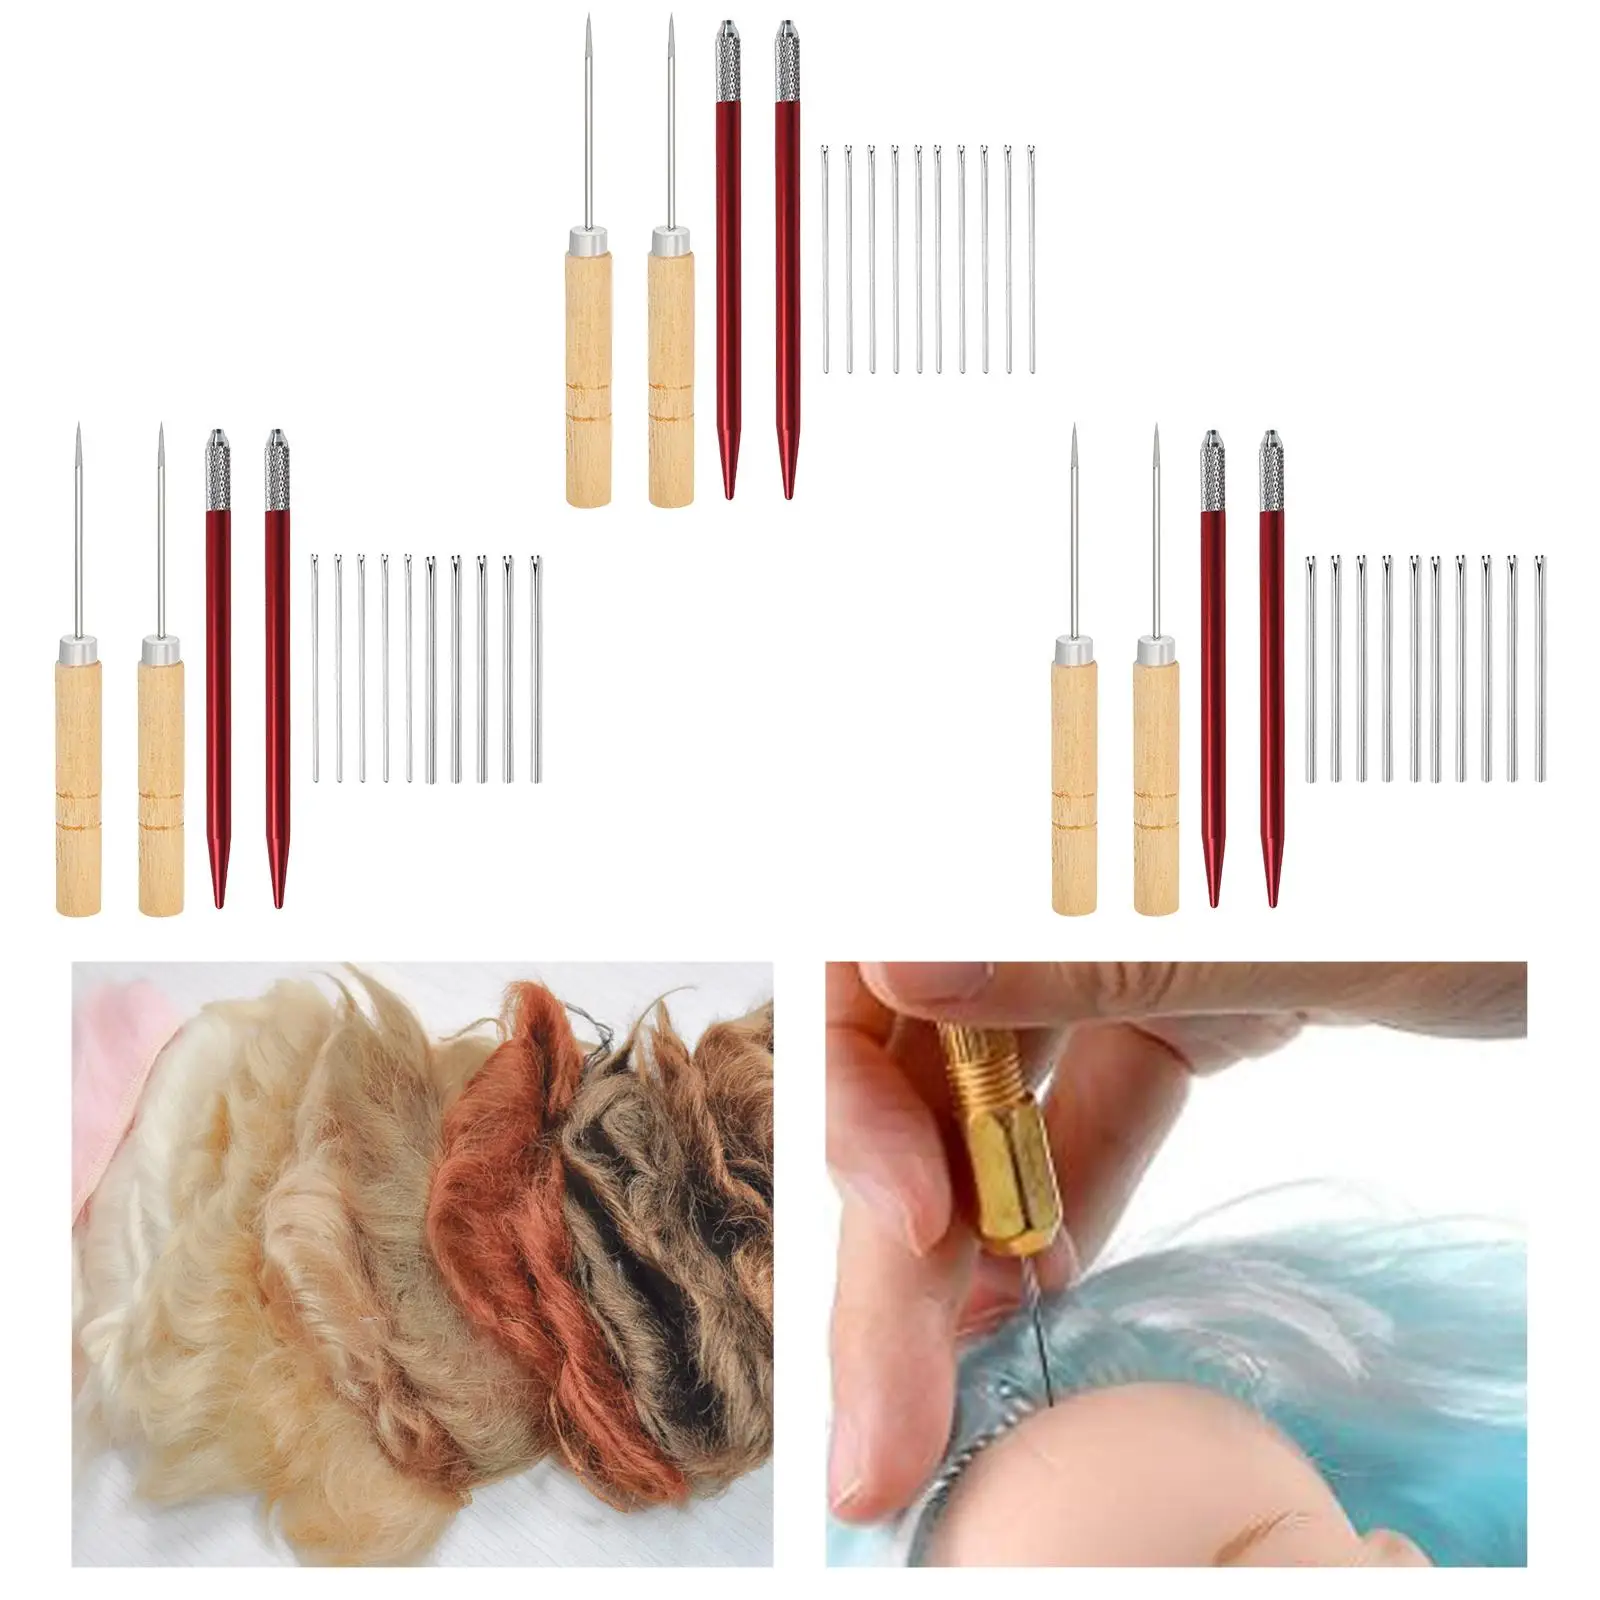 Doll Hair Rooting Tools, Doll Making Supplies, Needles, Doll Hair Rooting DIY Making Kit, Spare Parts, 1 Set, Easy to Use